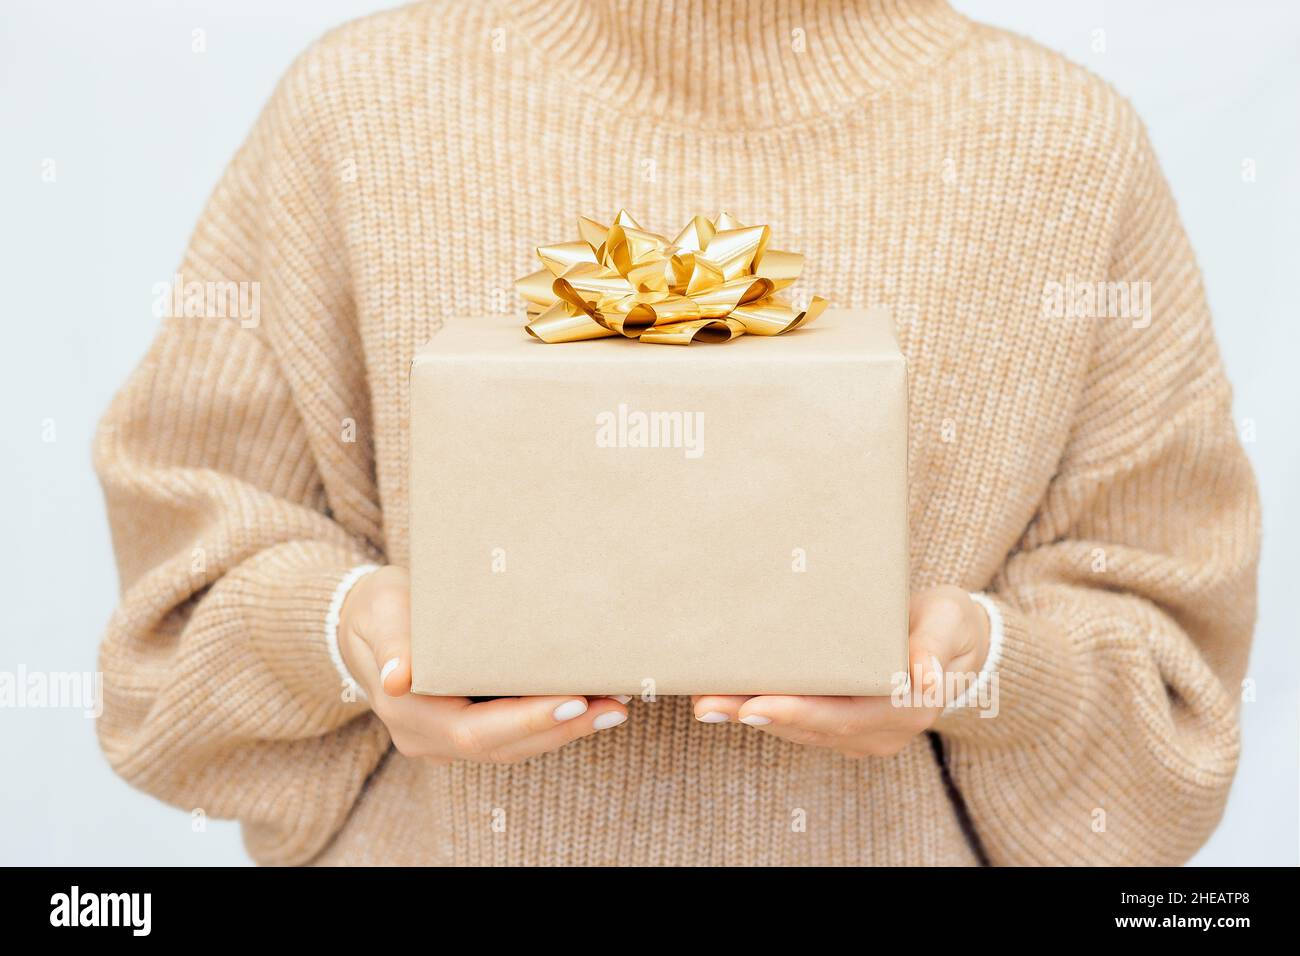 Woman's hands gift box with cold ribbon. woman in warm beige jumper Hold present box with bow.  Stock Photo